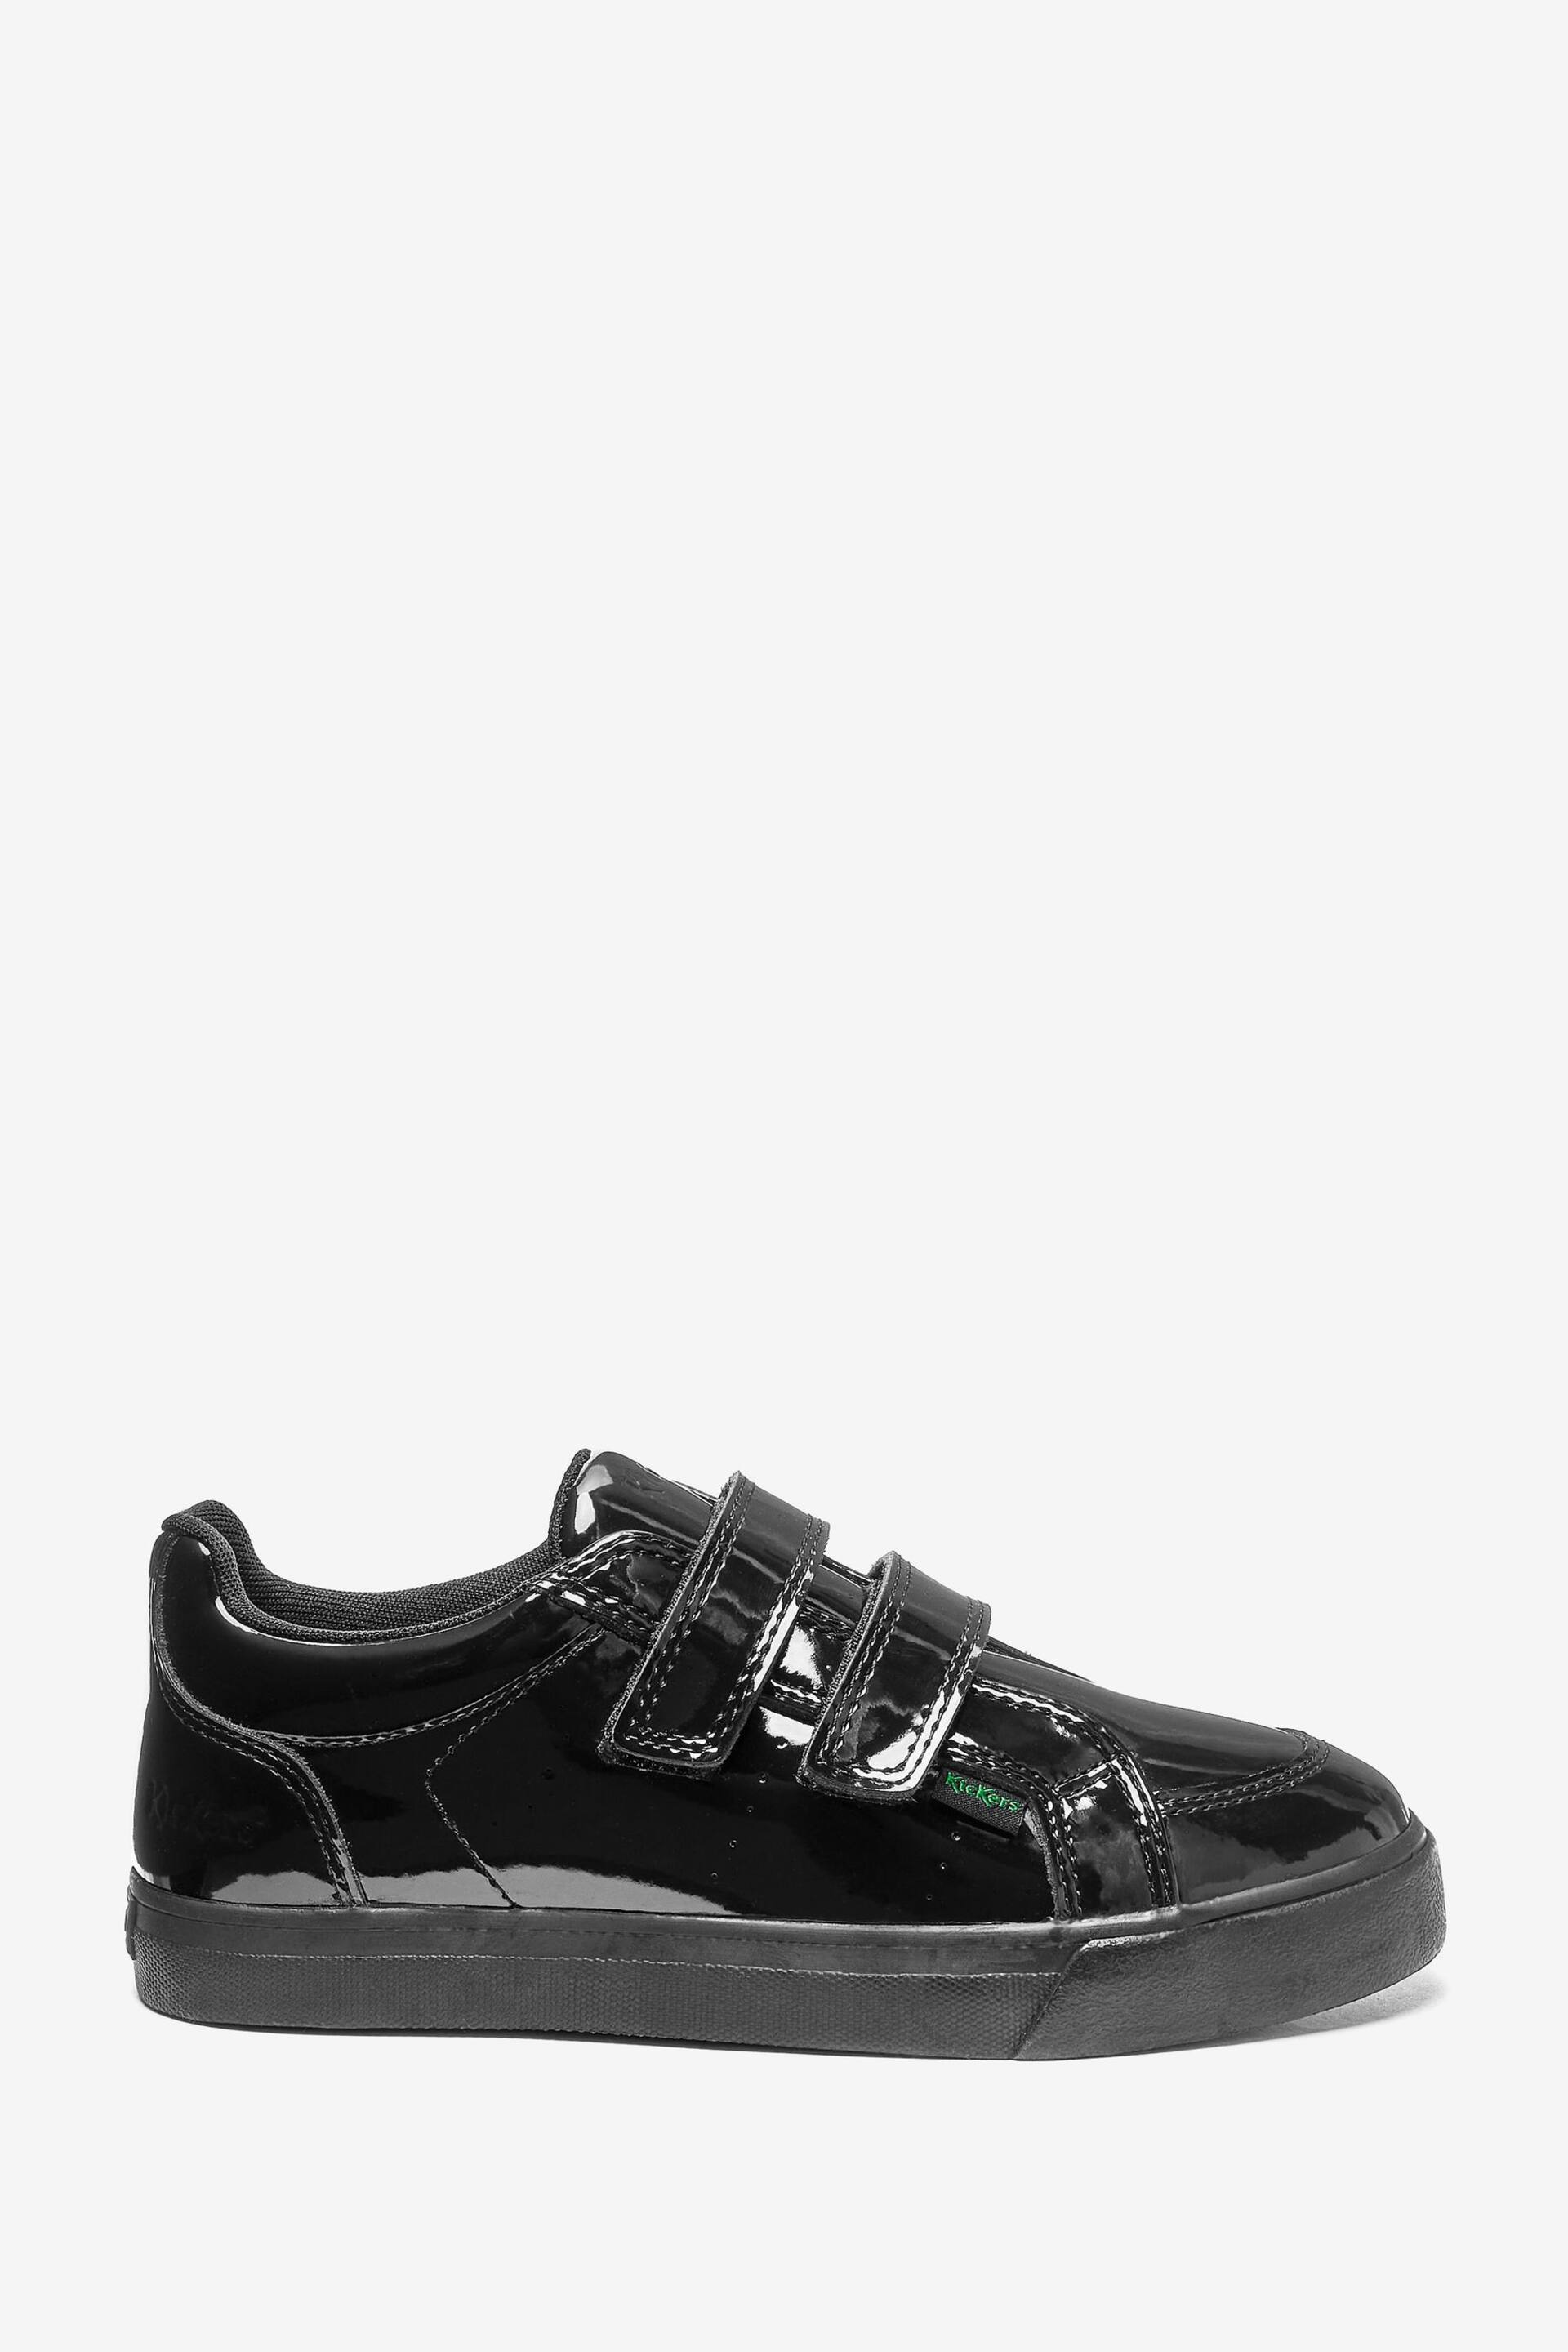 Kickers Junior Tovni Twin Strap Patent Leather Black Trainers - Image 1 of 8